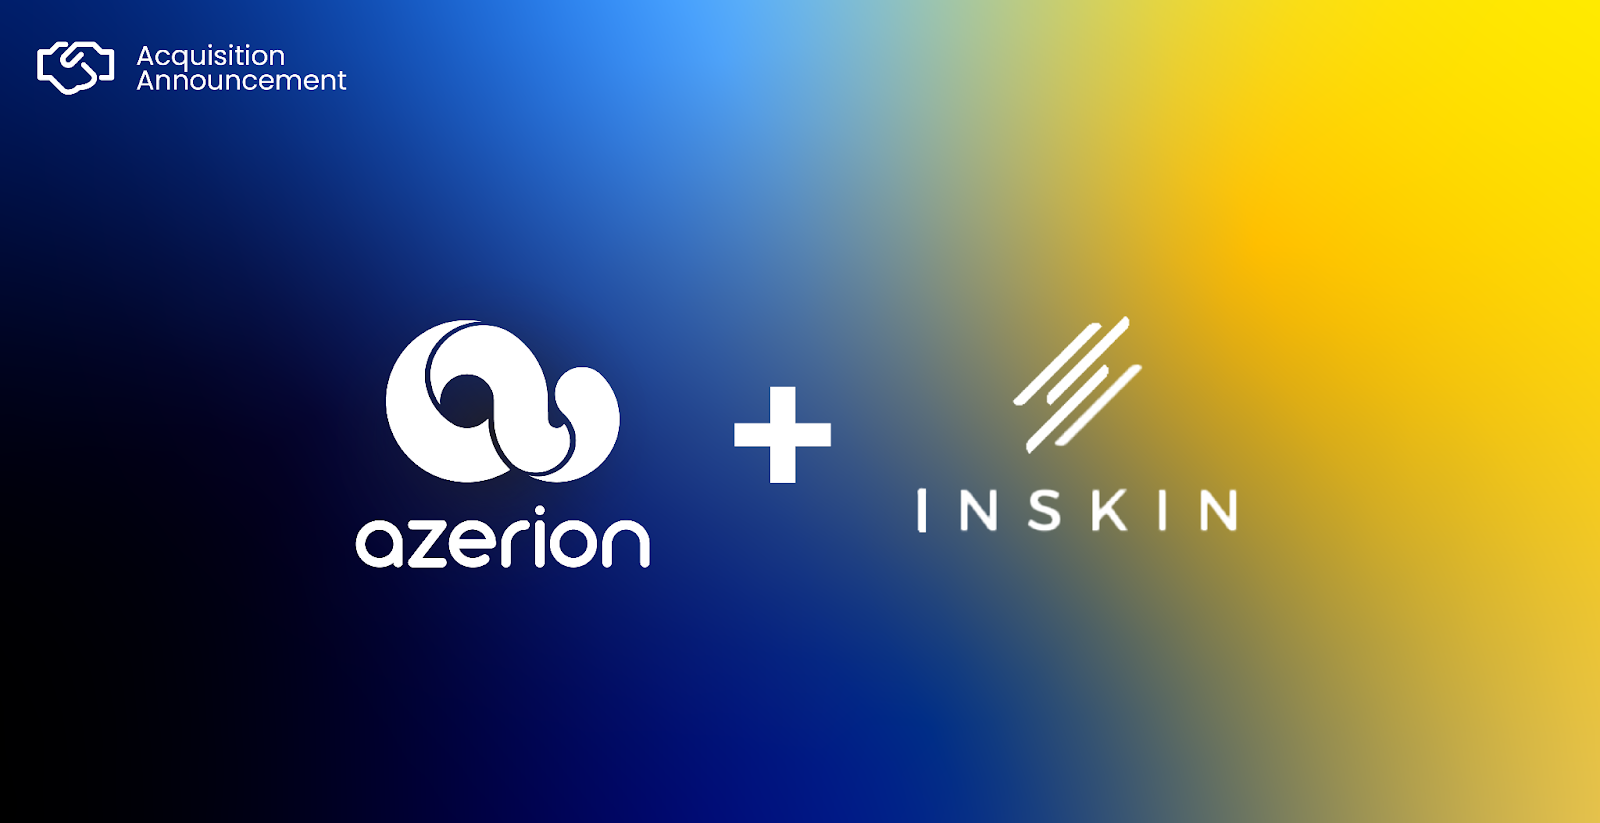 Azerion Becomes Europe’s Digital Powerhouse Following Strategic Acquisition of Inskin Media